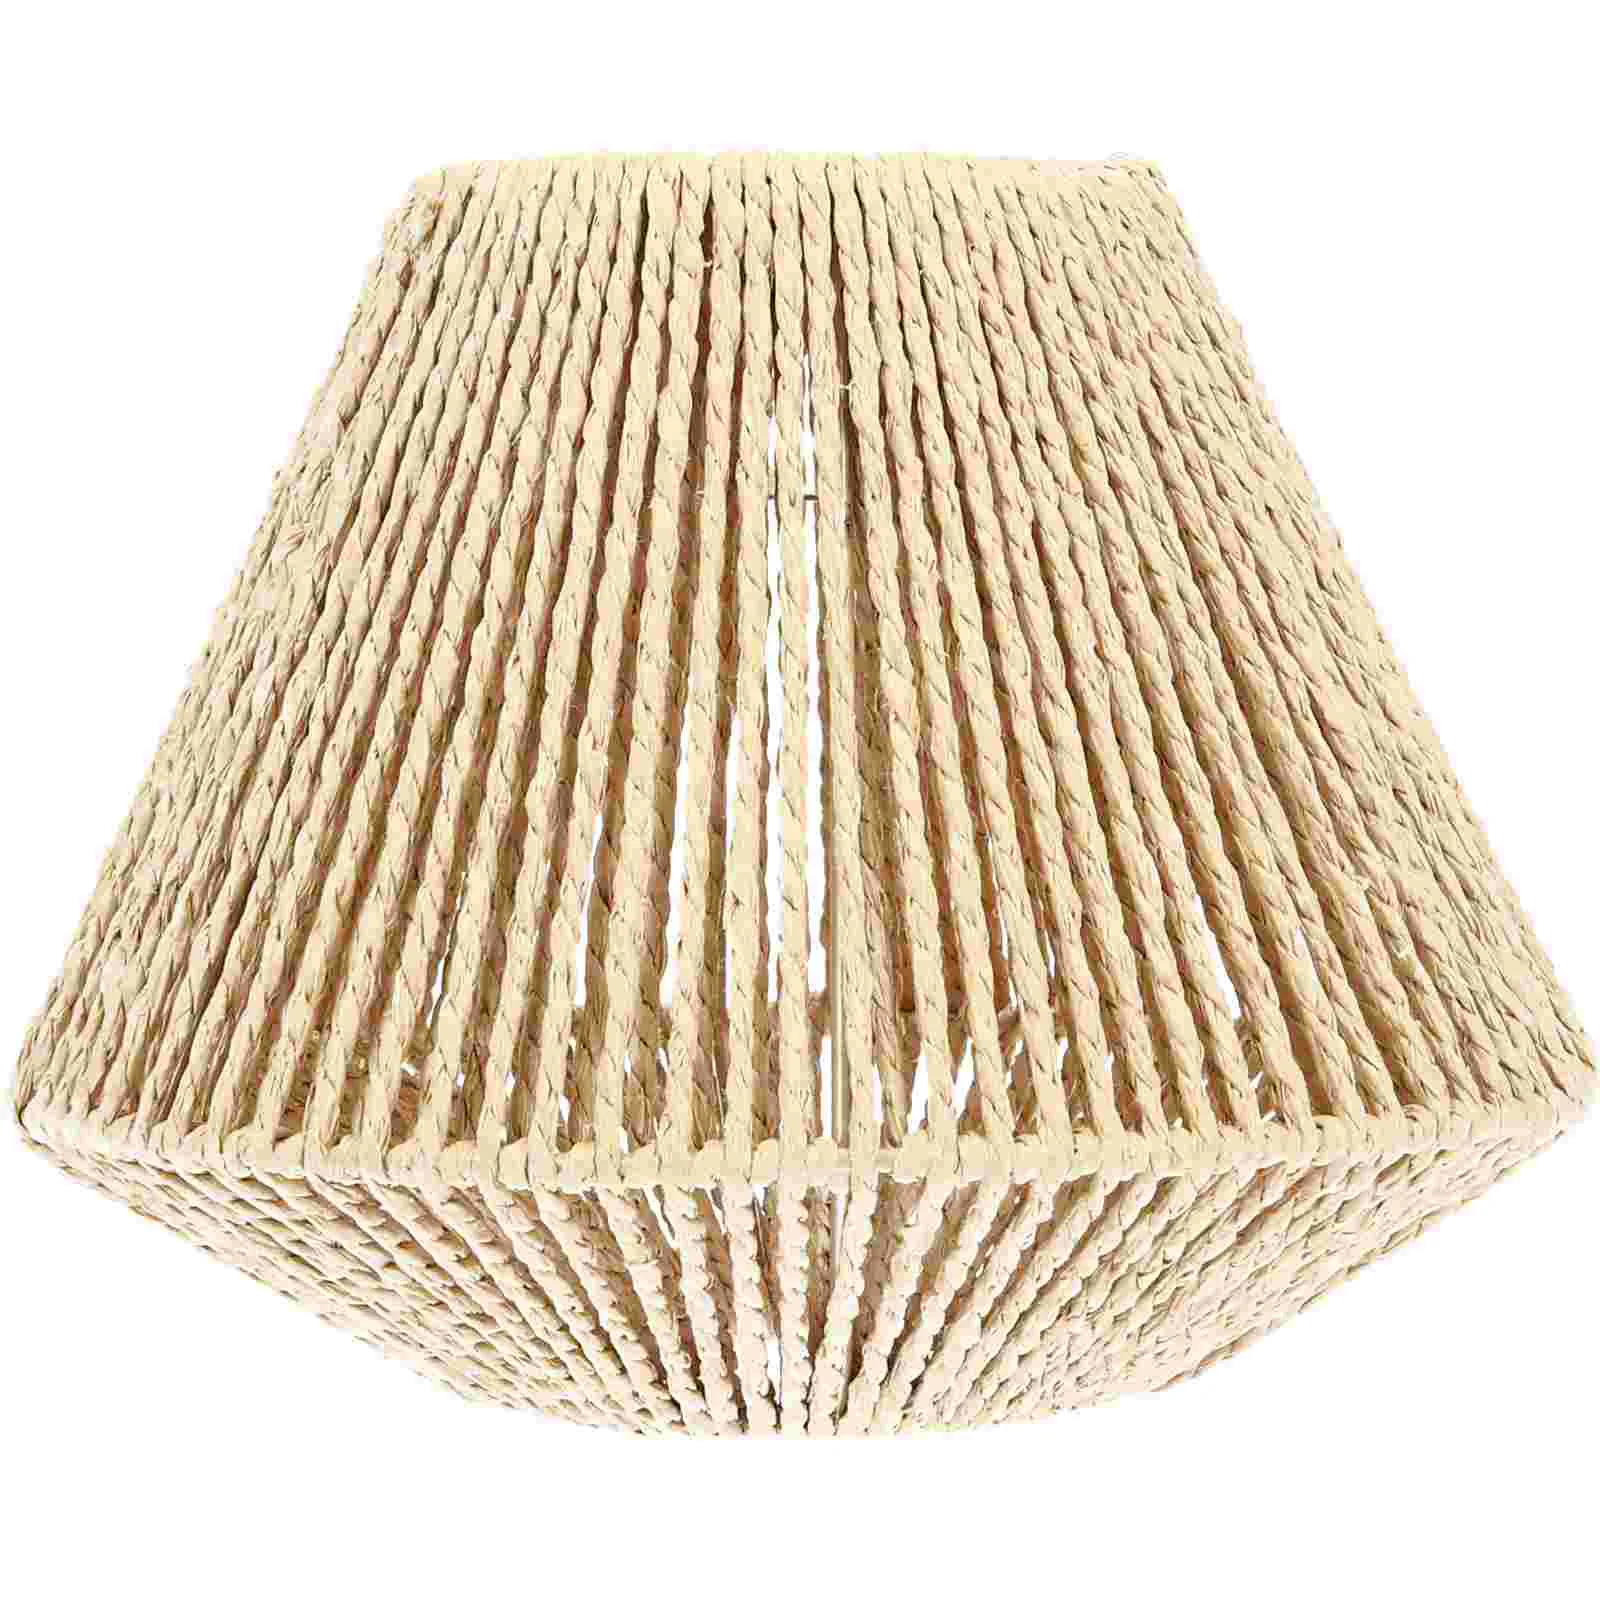 Rattan lampshade rustic wall sconces retro lampshades chandelier cover straw rope thumb200